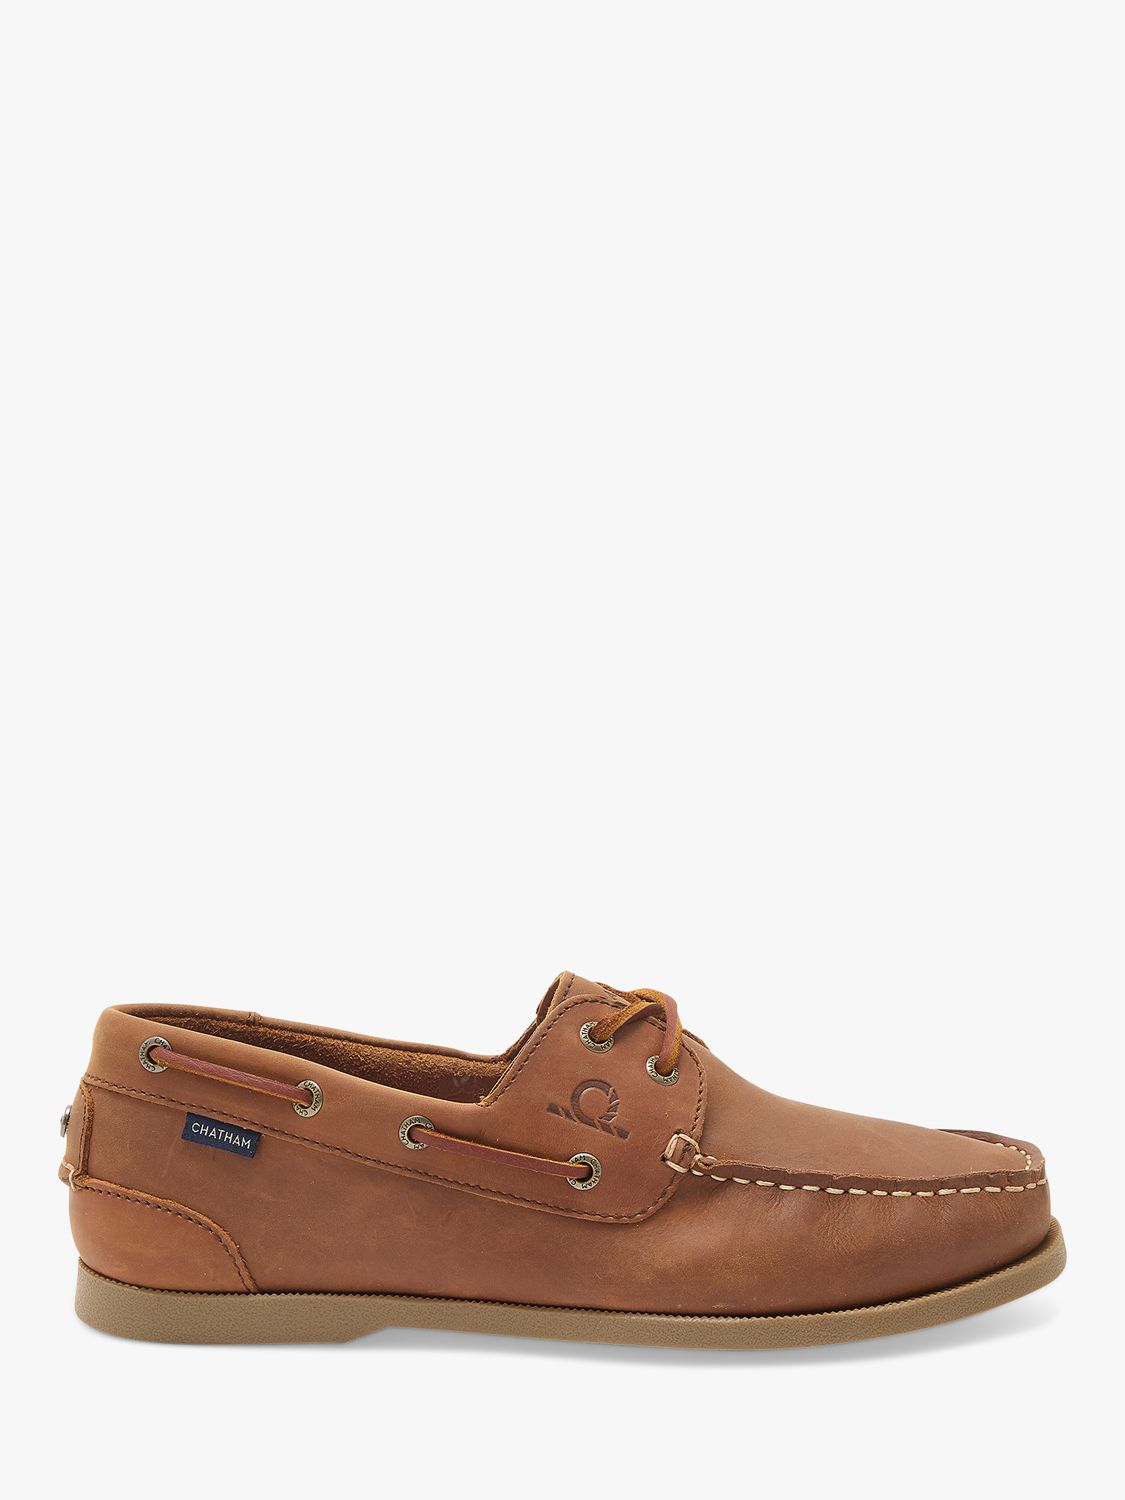 Chatham Galley II Leather Boat Shoes, Dark Tan at John Lewis & Partners